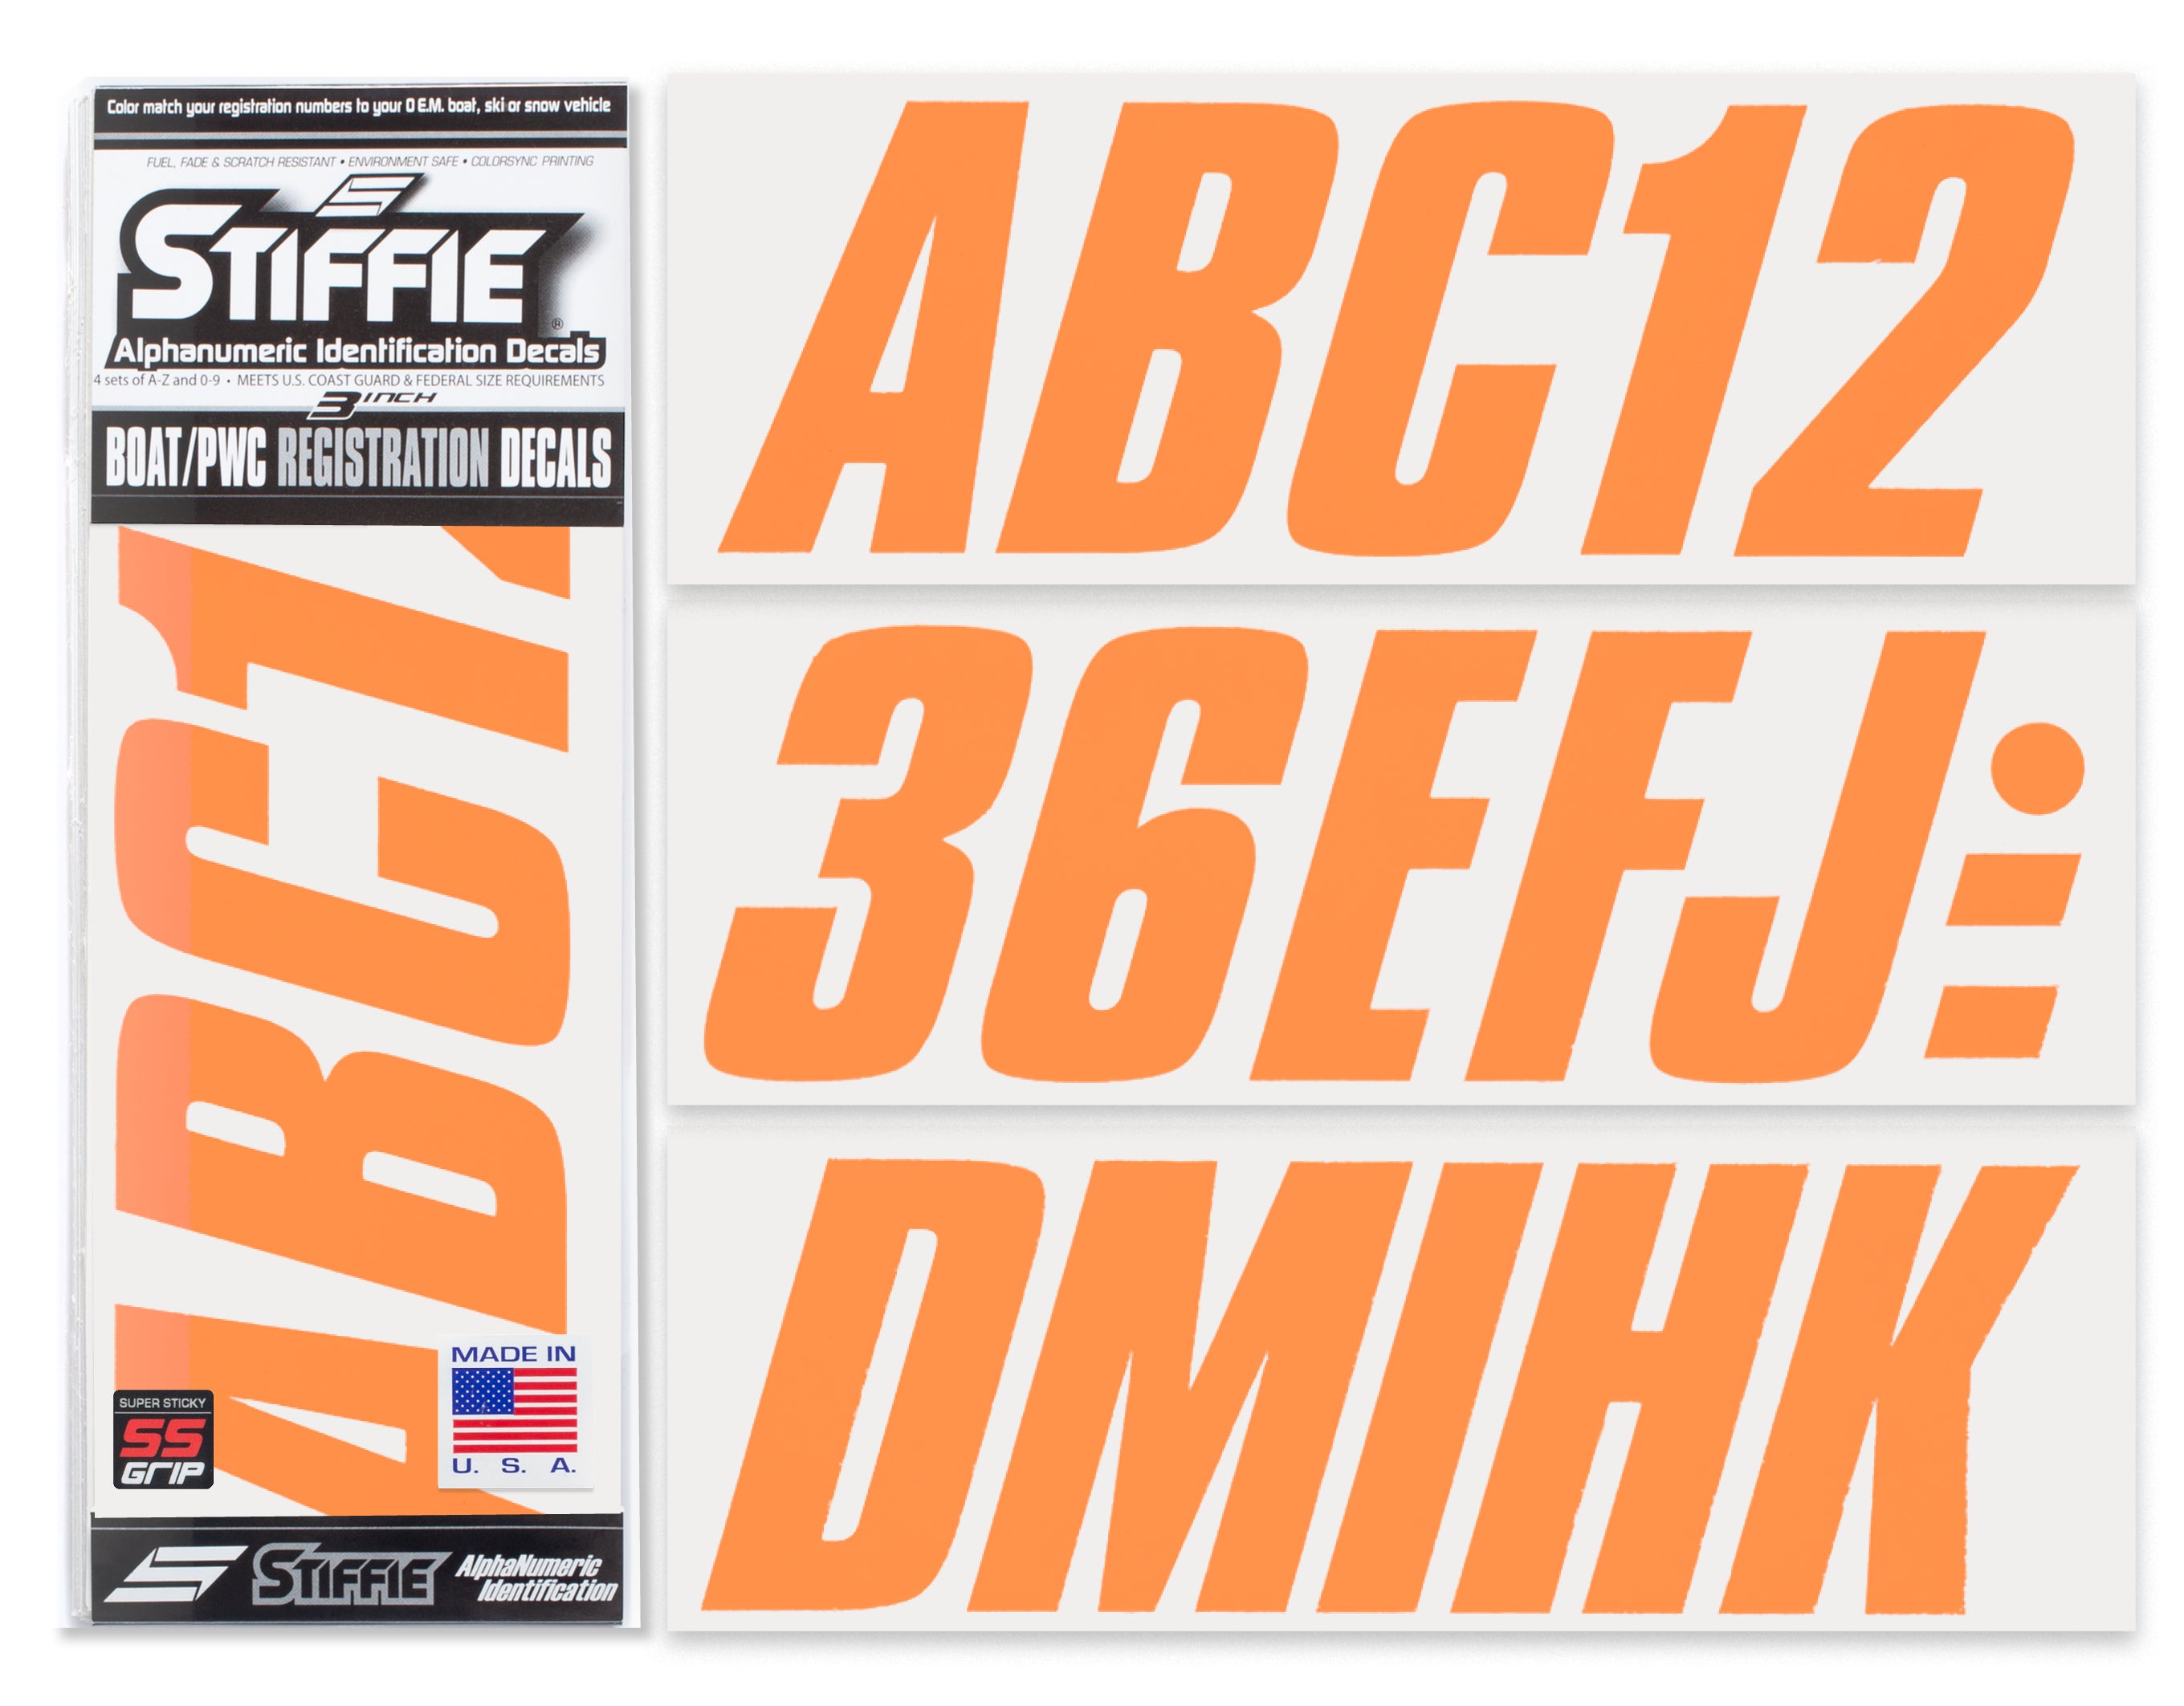 STIFFIE Shift Orange Crush Super Sticky 3" Alpha Numeric Registration Identification Numbers Stickers Decals for Sea-Doo Spark, Inflatable Boats, Ribs, Hypalon/PVC, PWC and Boats.